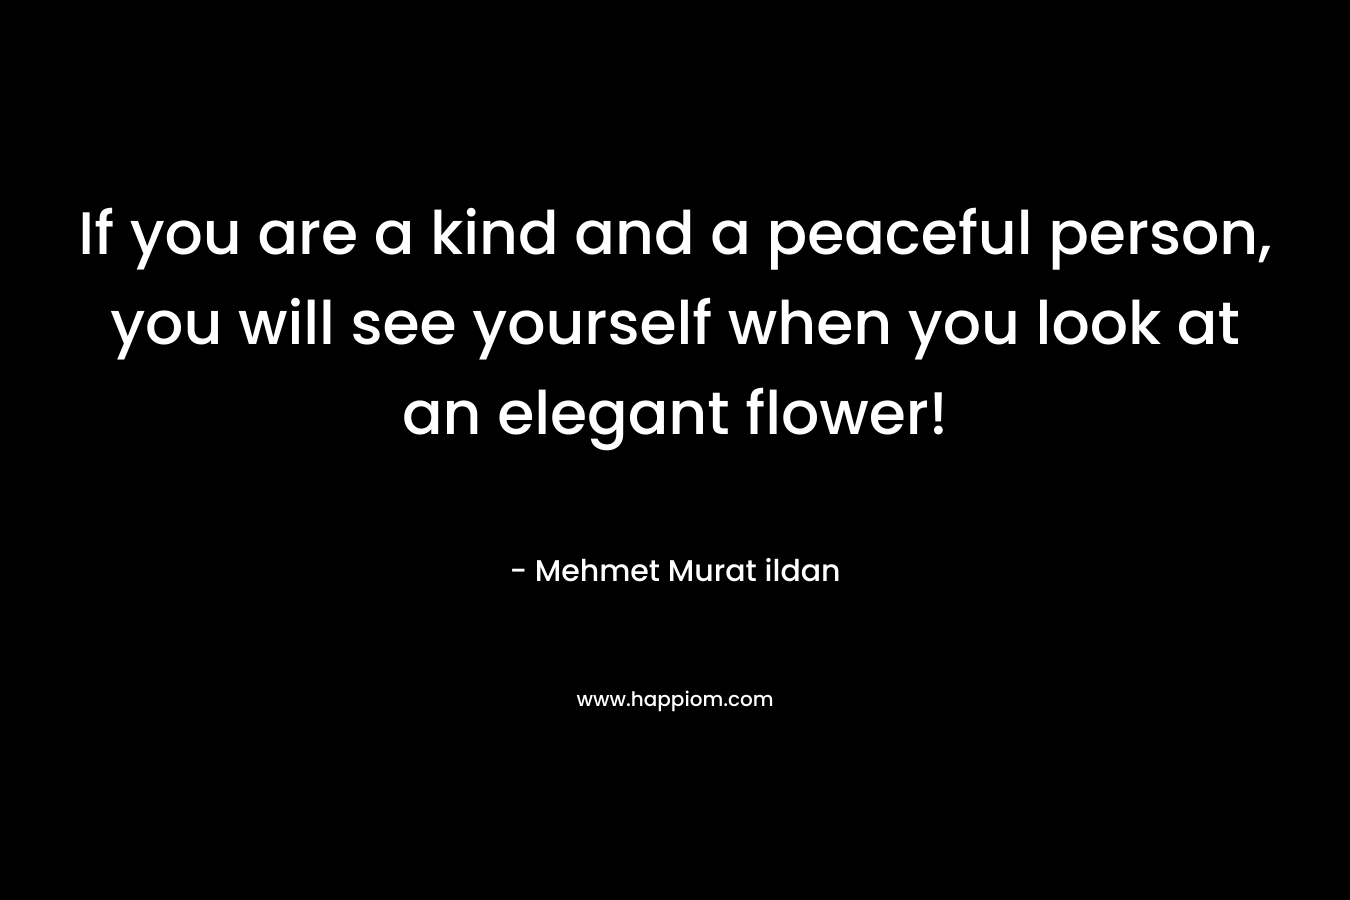 If you are a kind and a peaceful person, you will see yourself when you look at an elegant flower!